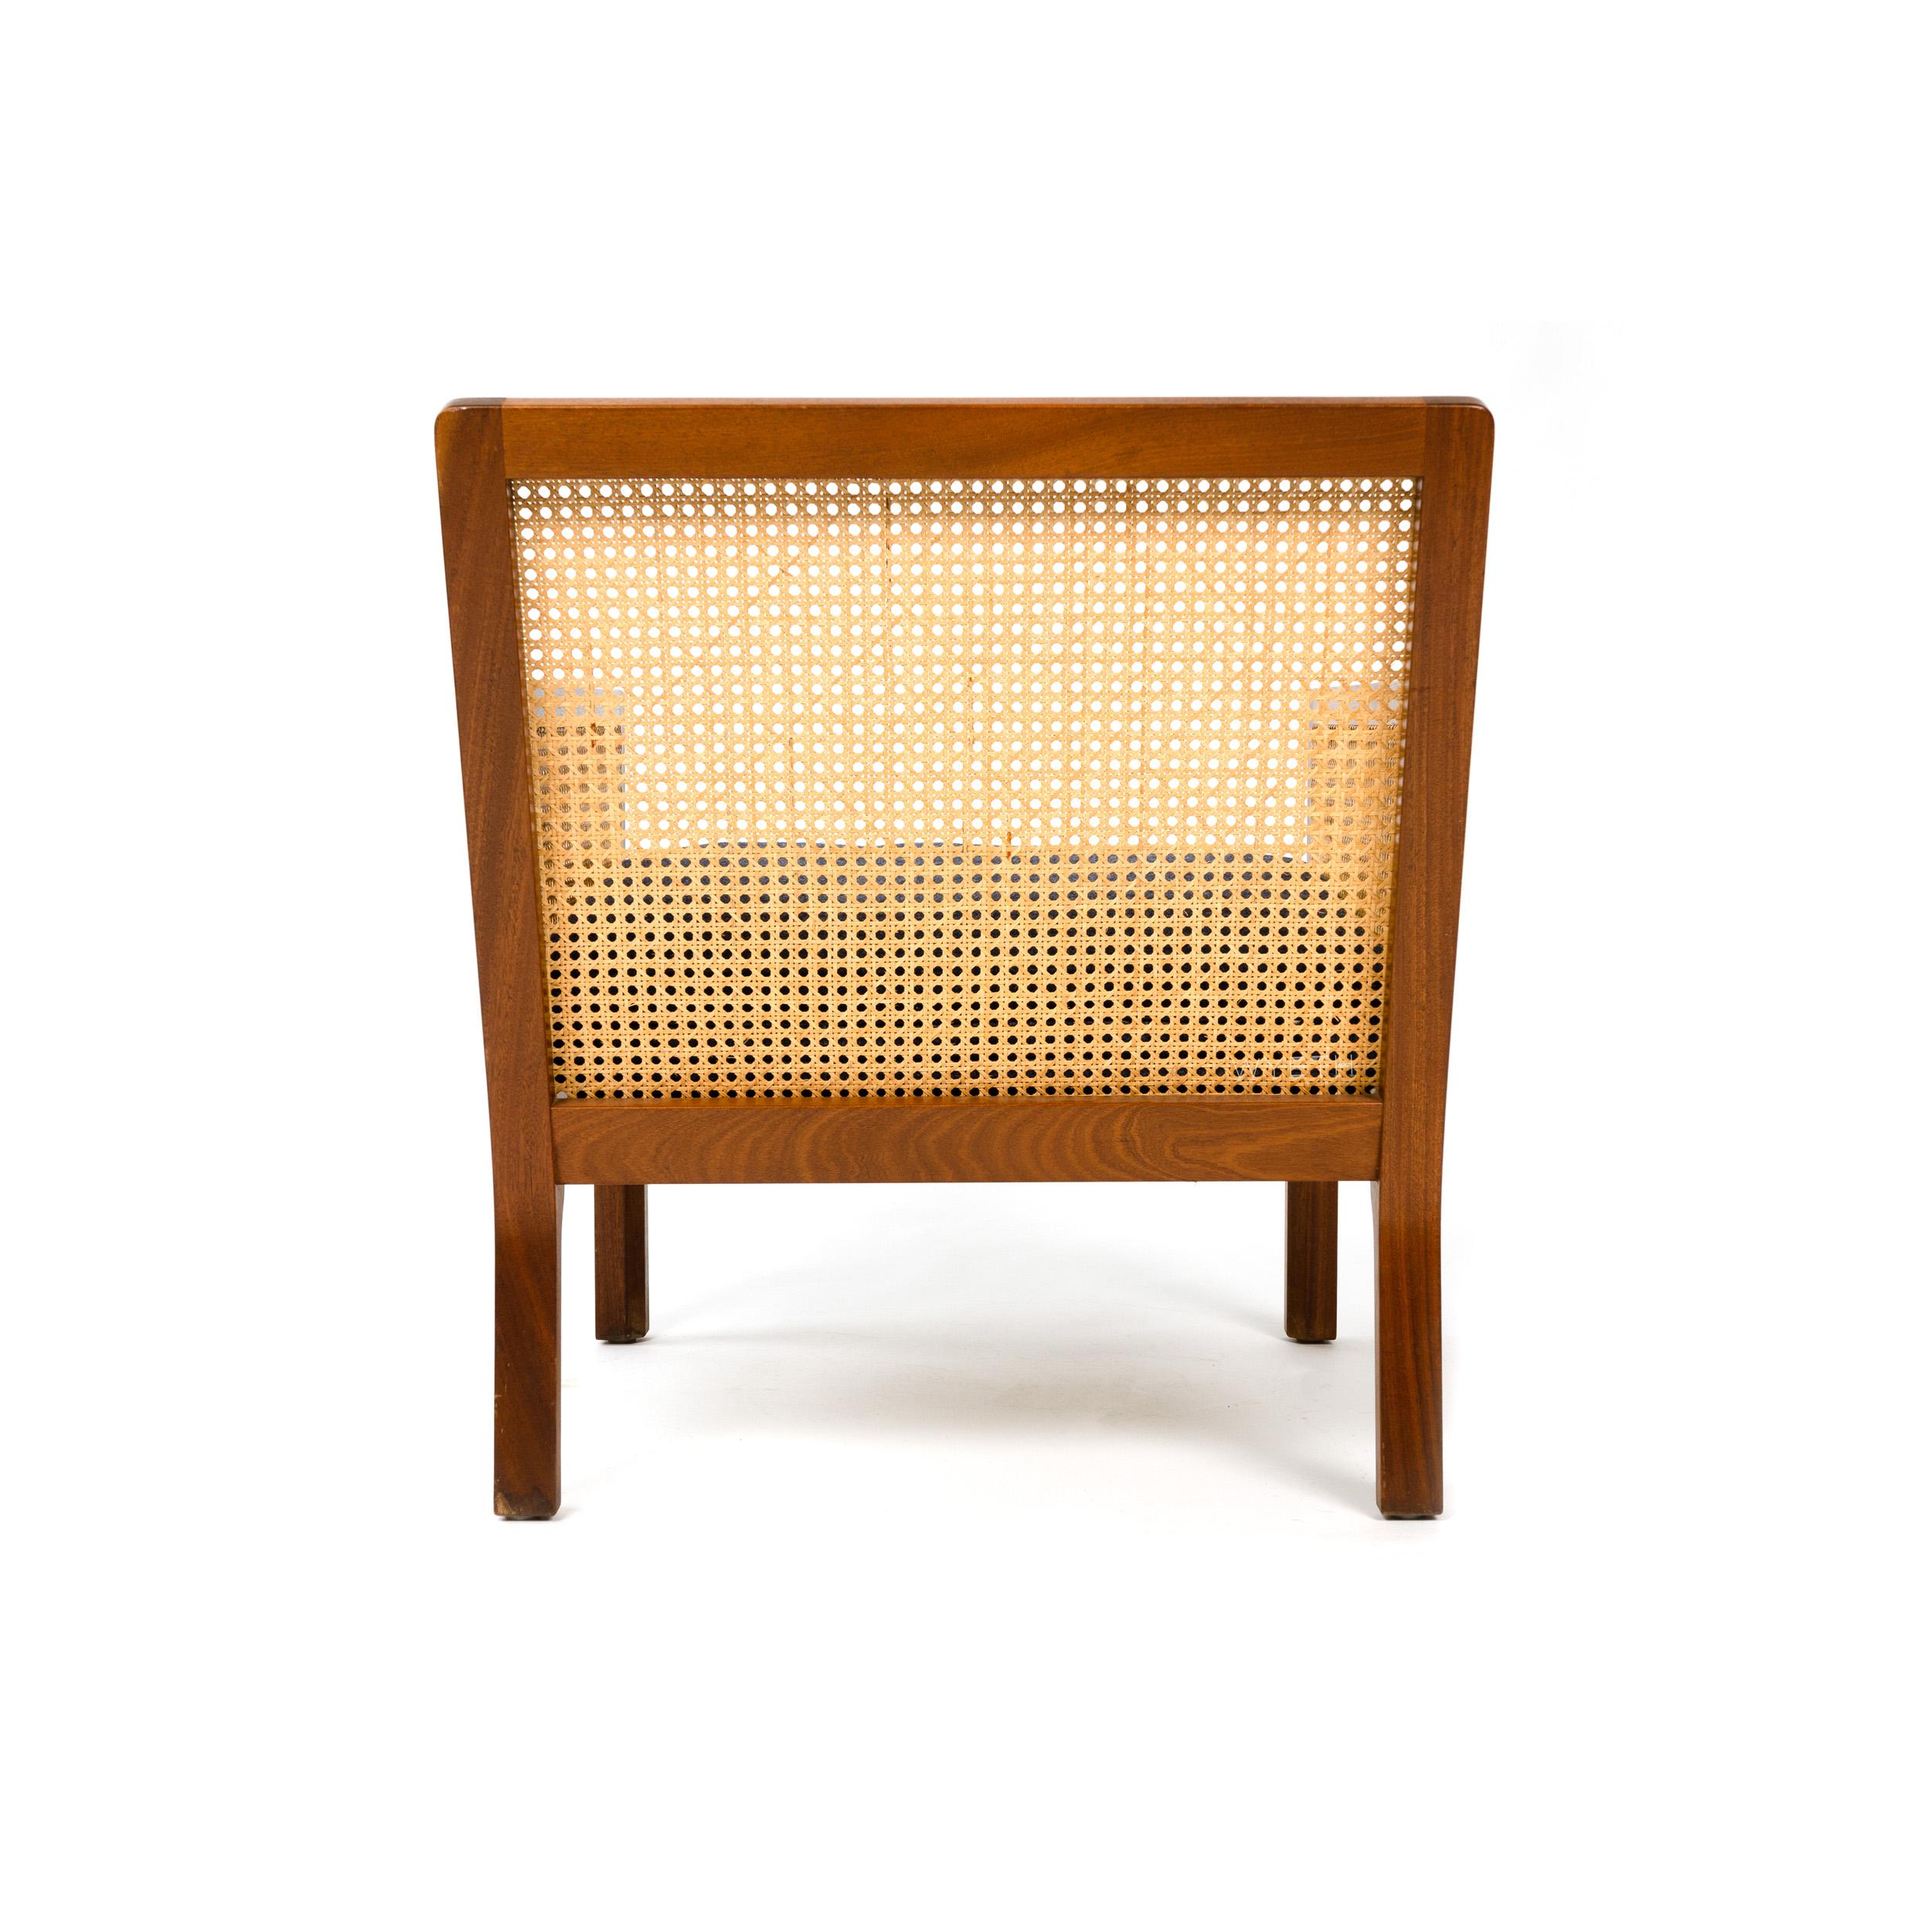 1960s Mahogany & Cane Lounge Chair by Bernt Petersen for Worts Mobelsnedkeri In Good Condition For Sale In Sagaponack, NY